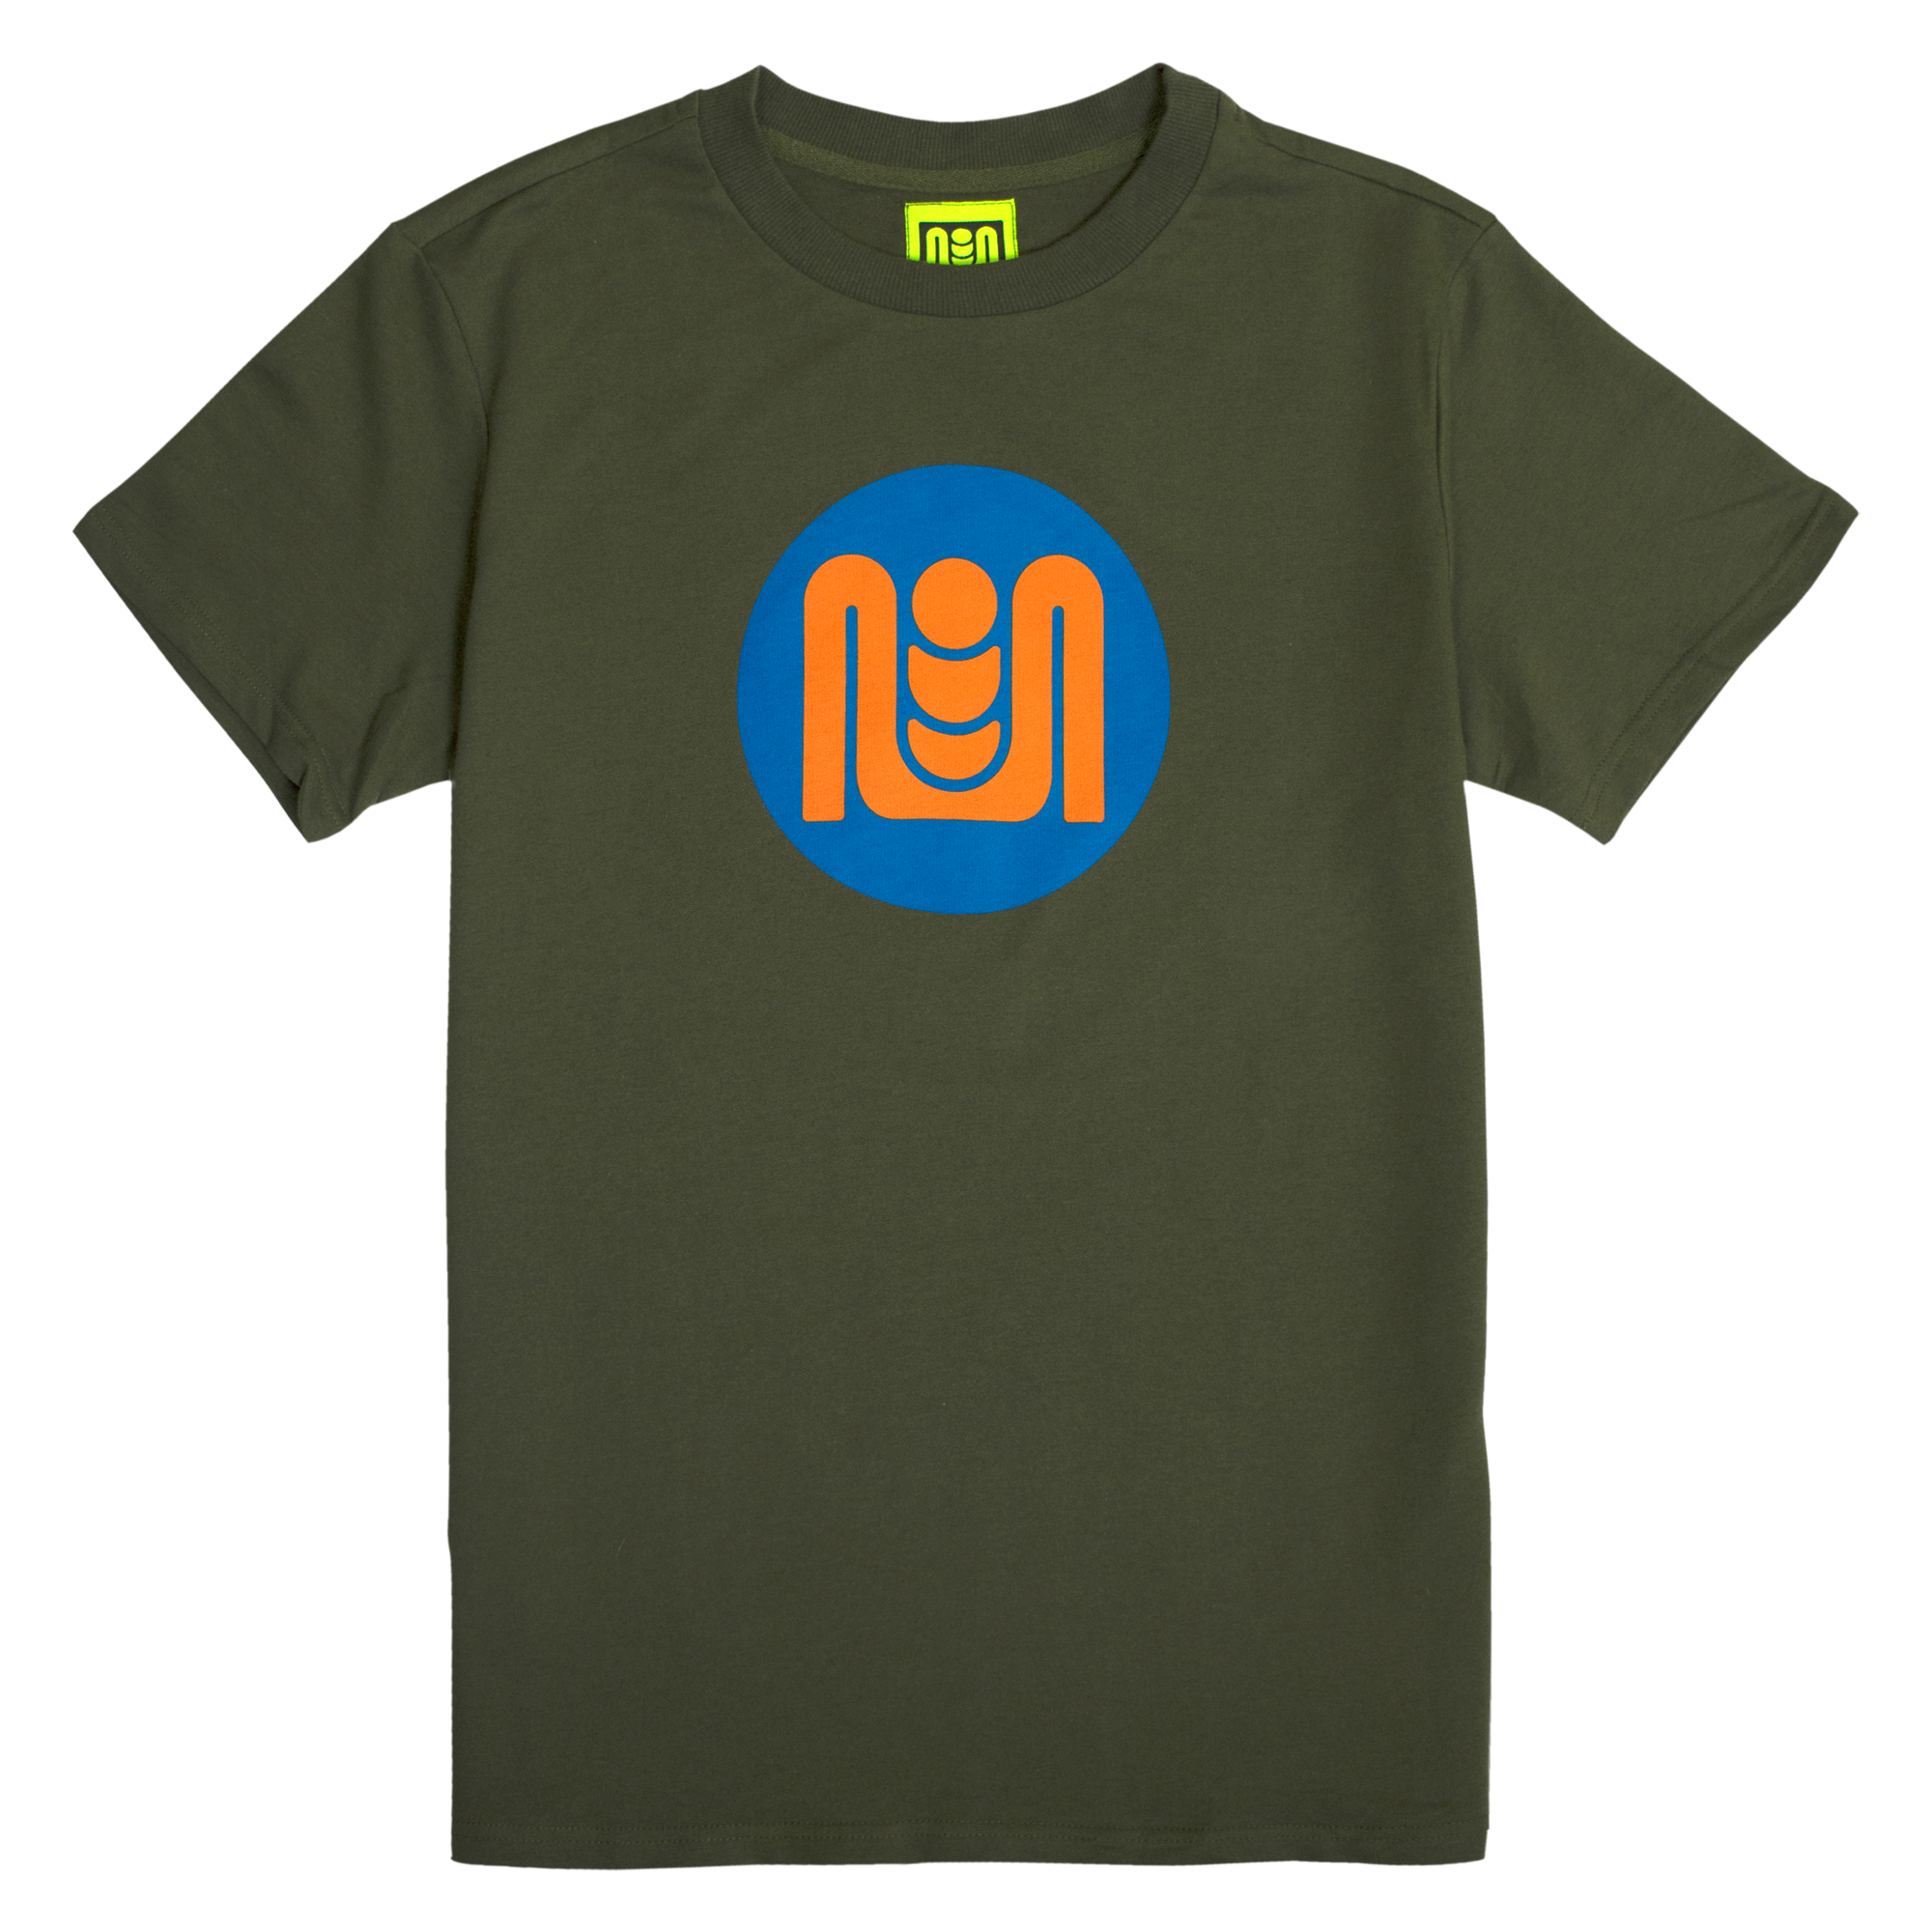 BUTTON LOGO TEE - OLIVE GREEN